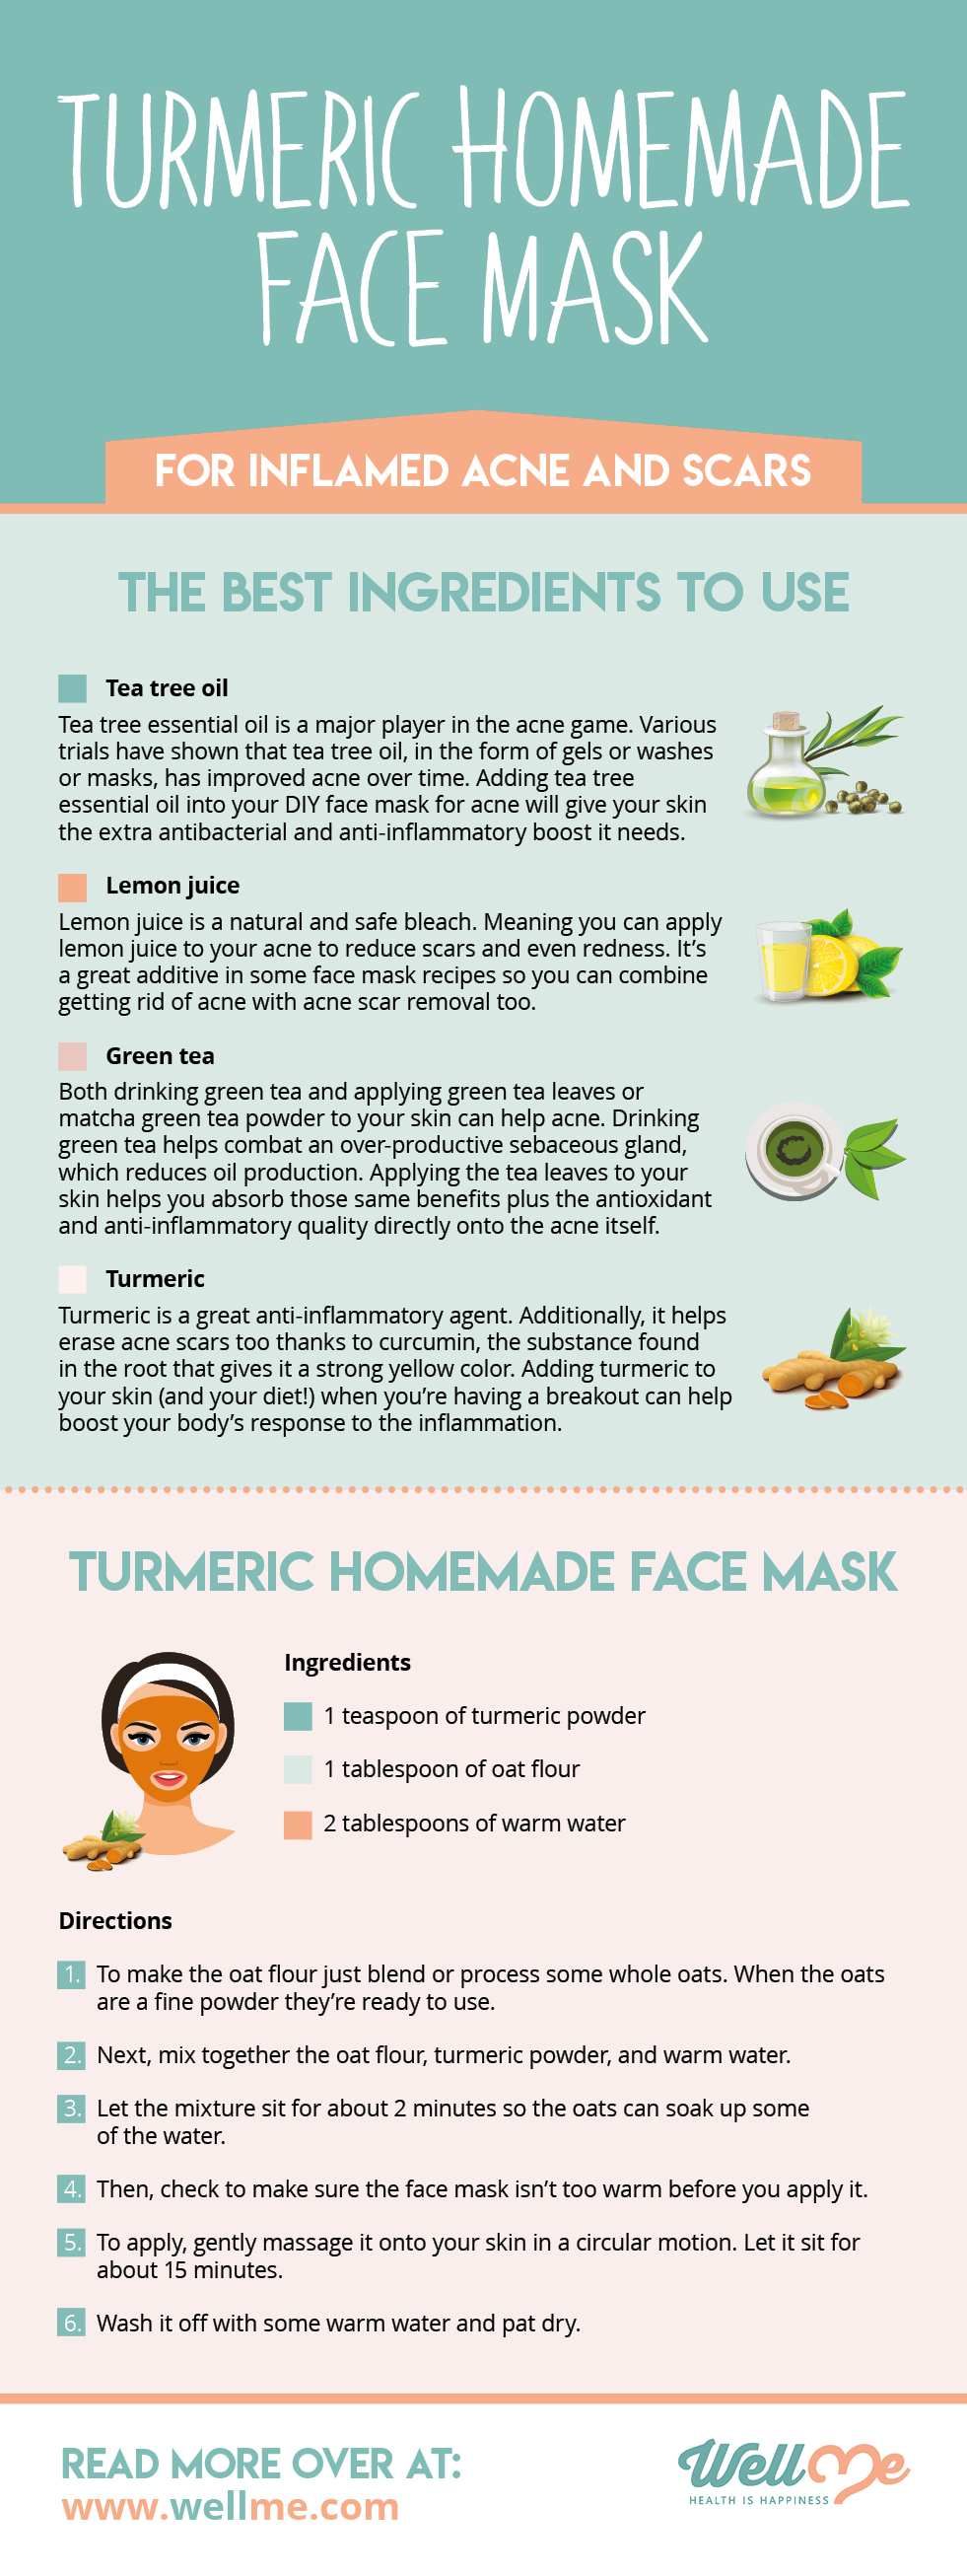 Turmeric Homemade Face Mask For Inflamed Acne and Scars infographic 